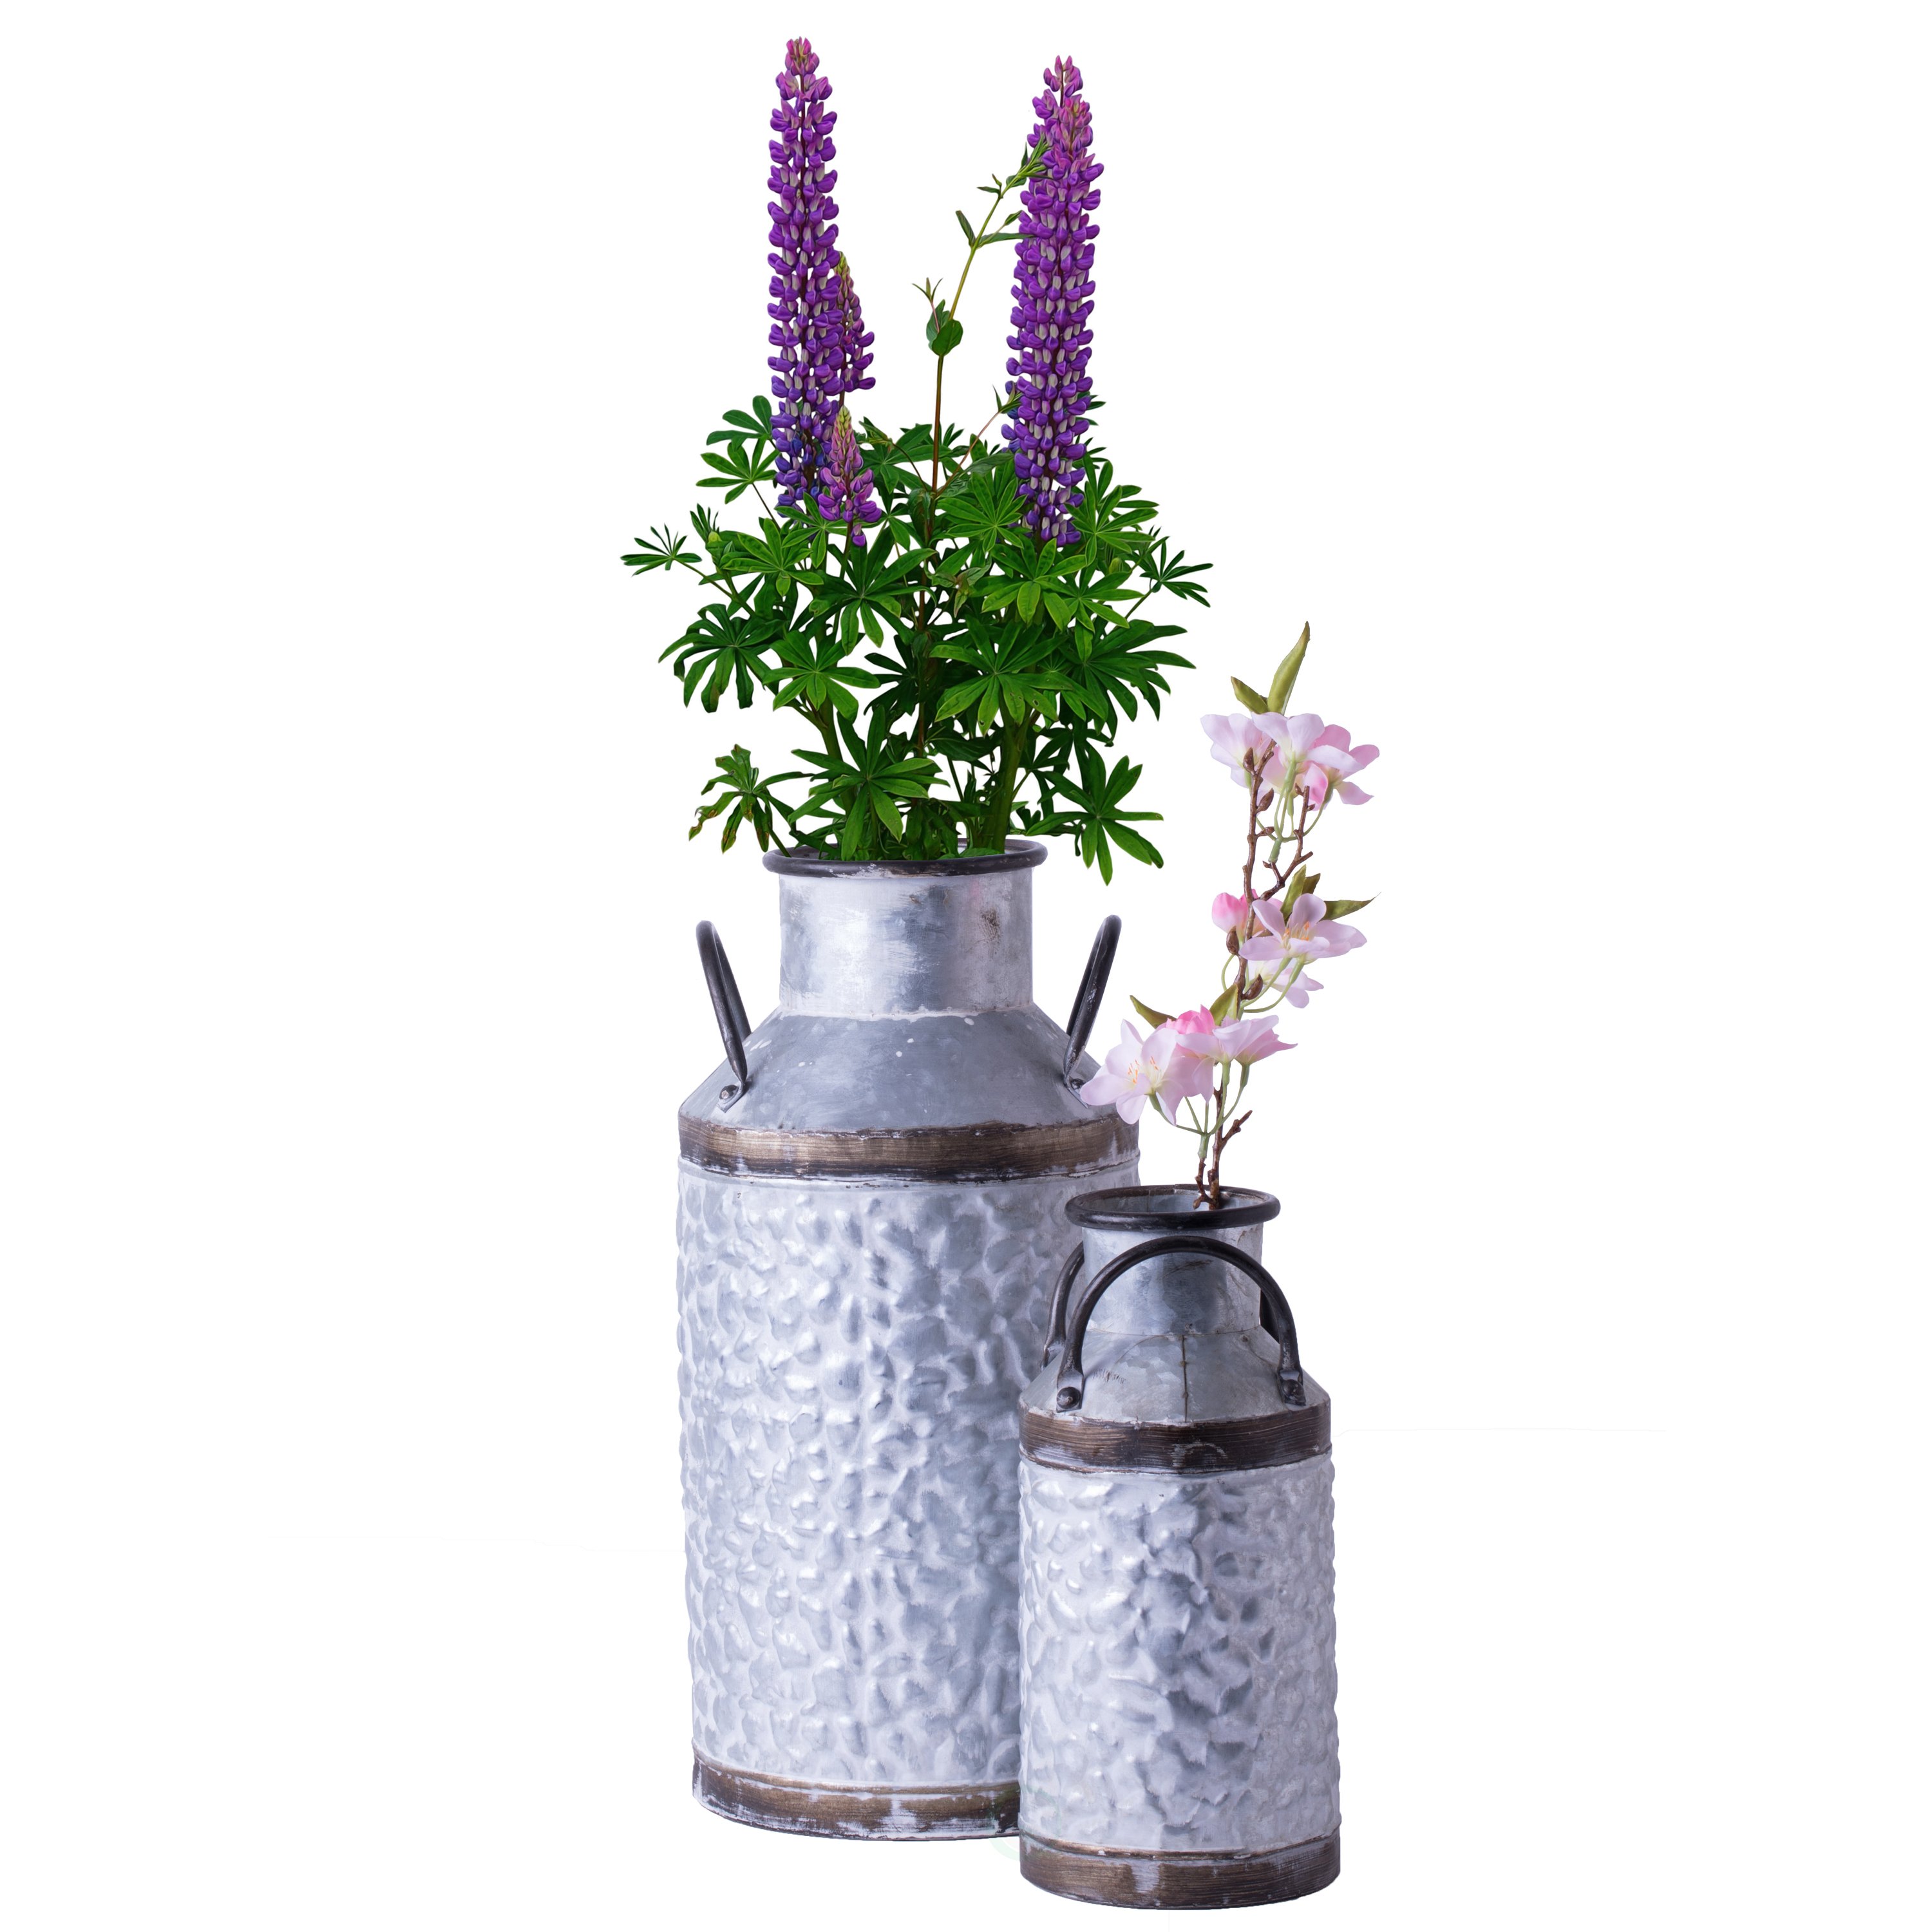 Rustic Farmhouse Style Galvanized Metal Milk Can Decoration Planter And Vase, - Set Of 2